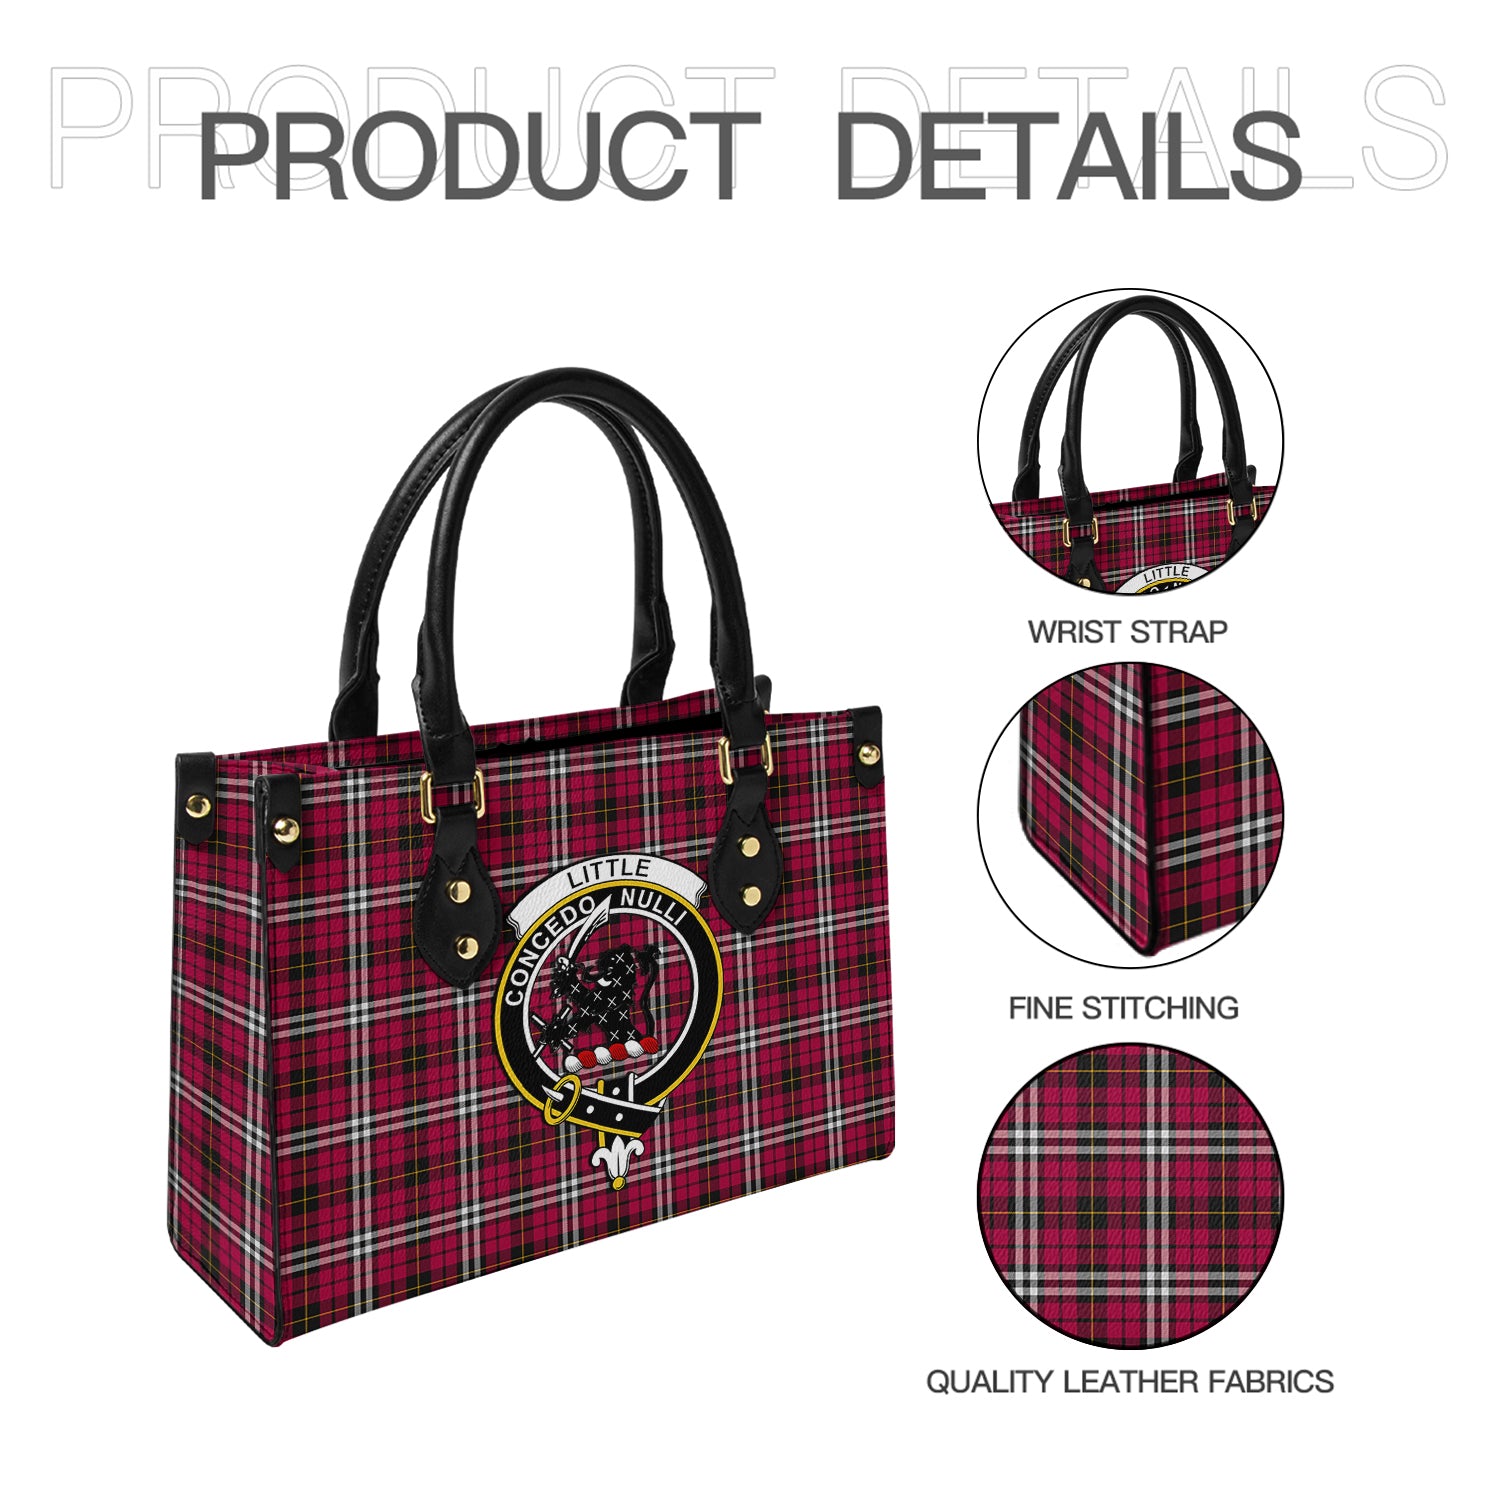 little-tartan-leather-bag-with-family-crest